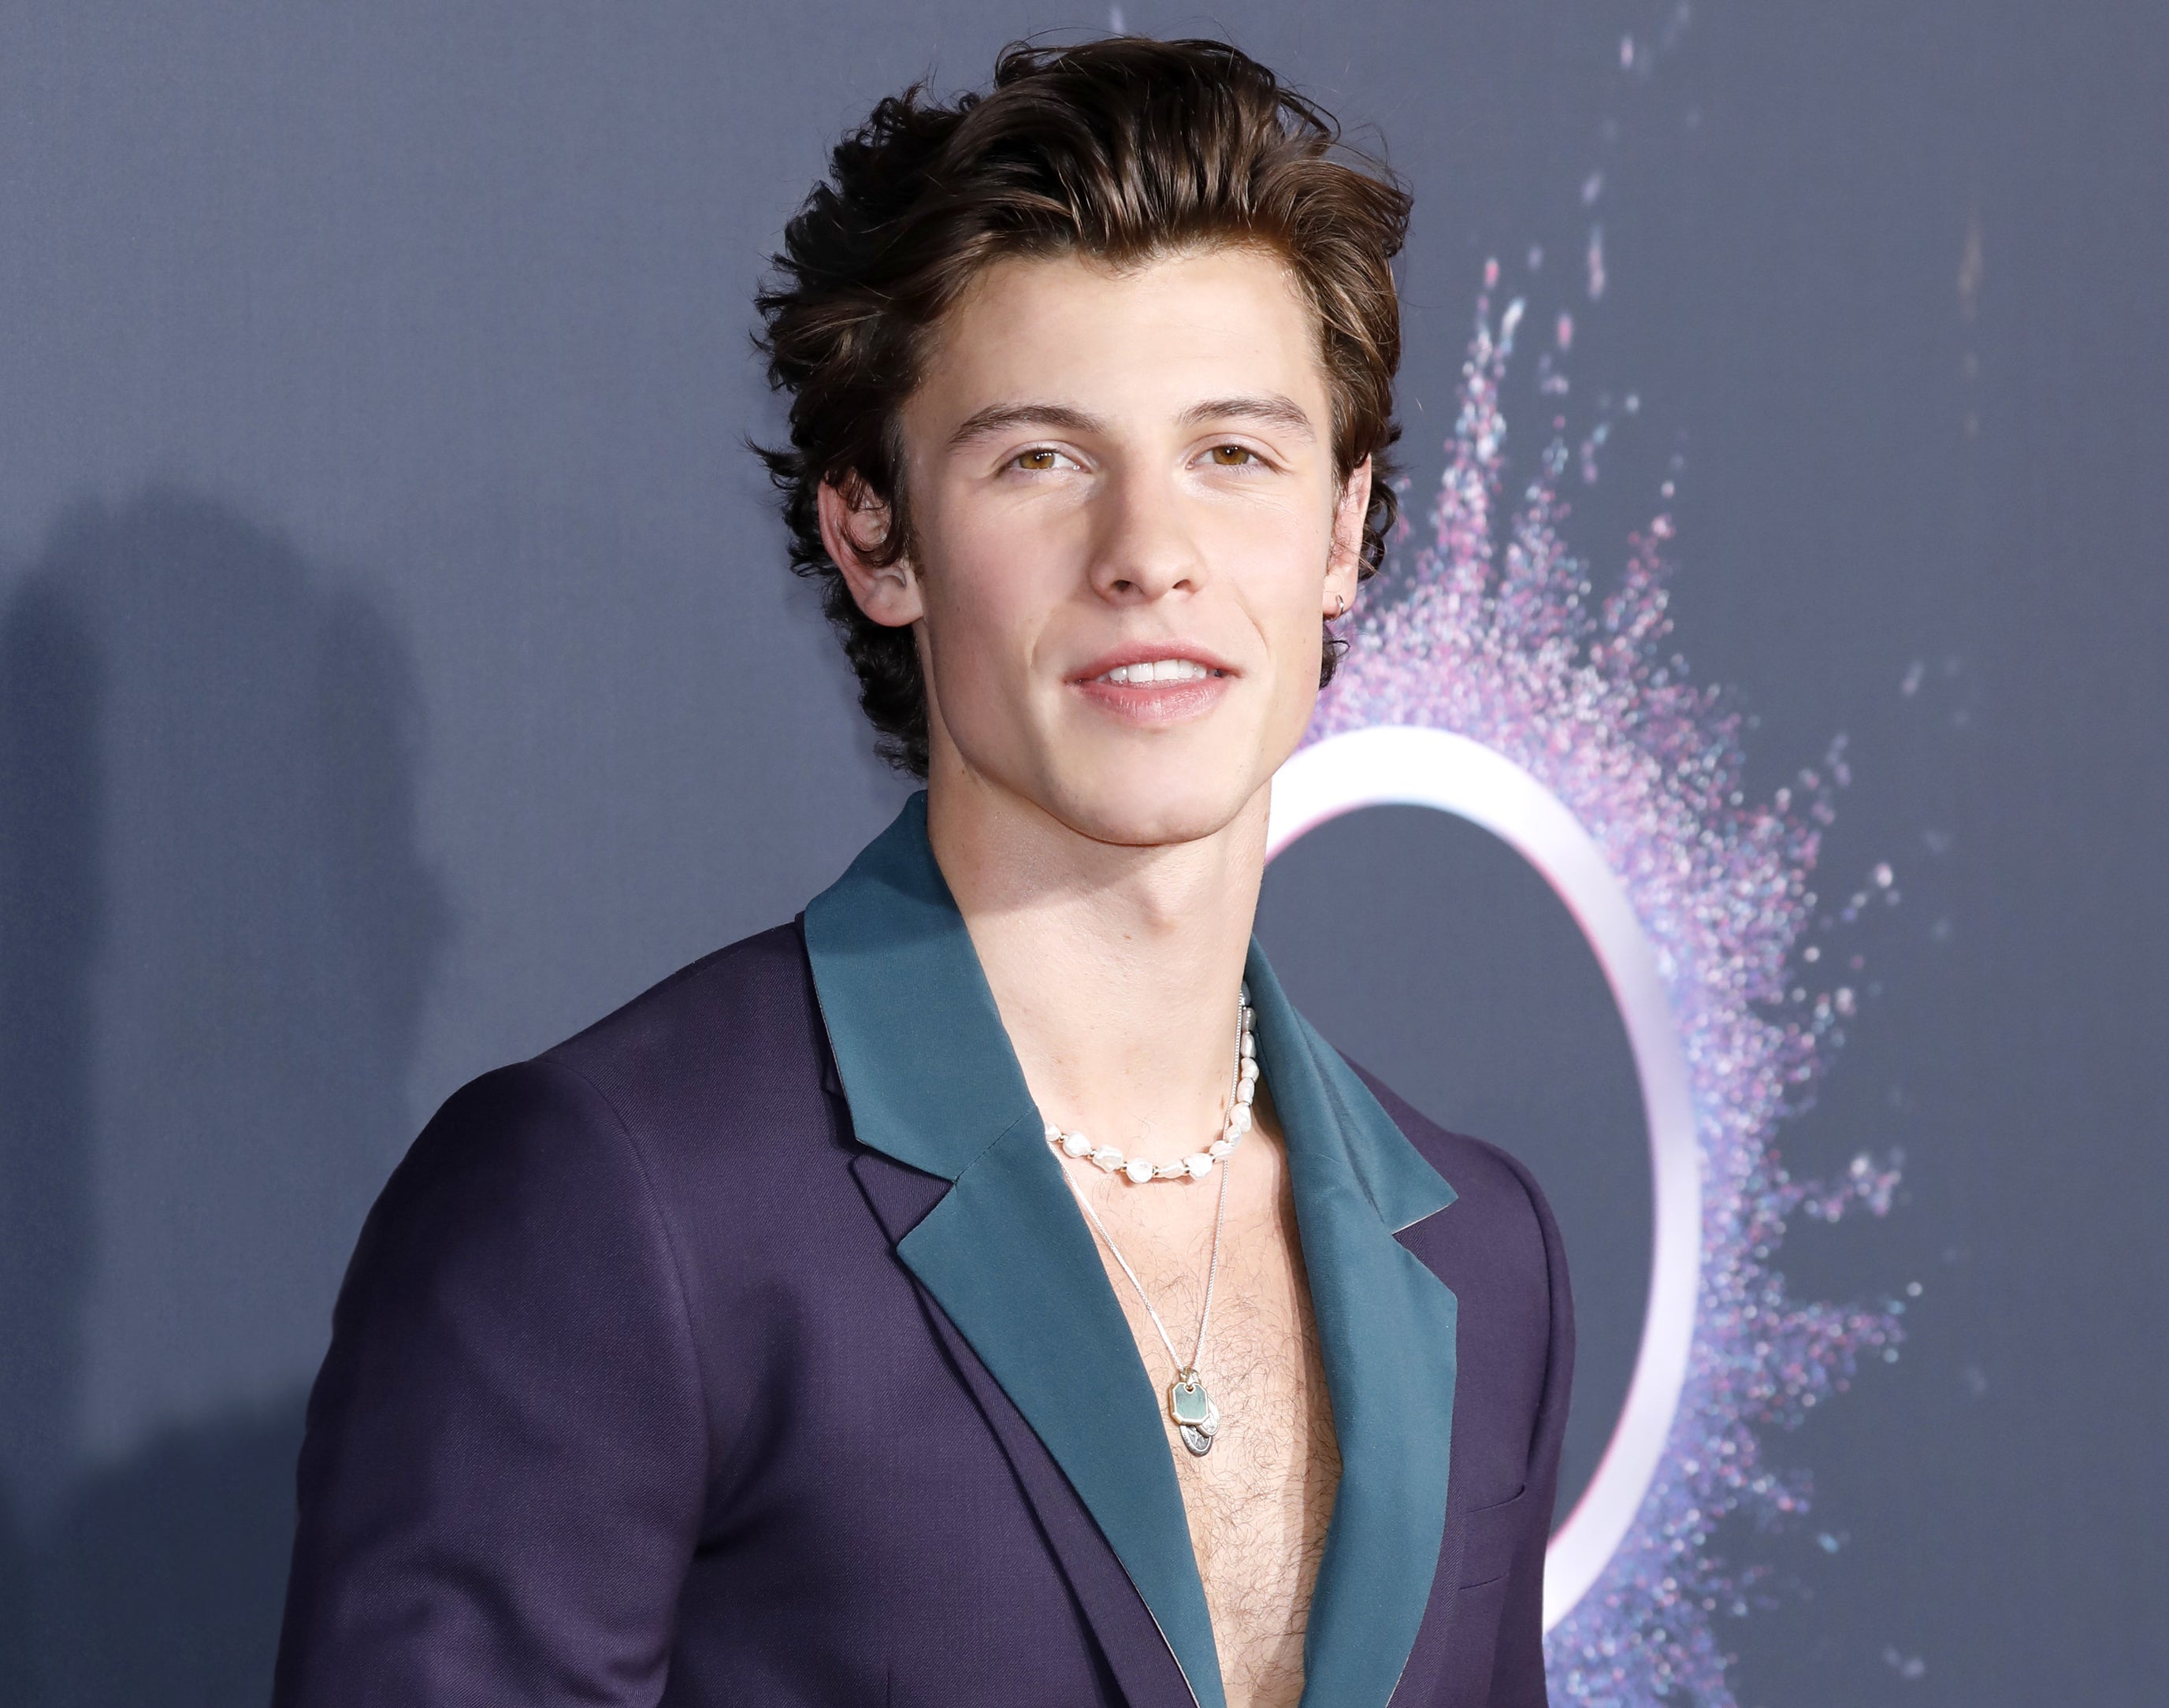 Shawn wears a purple suit jacket and teal button down